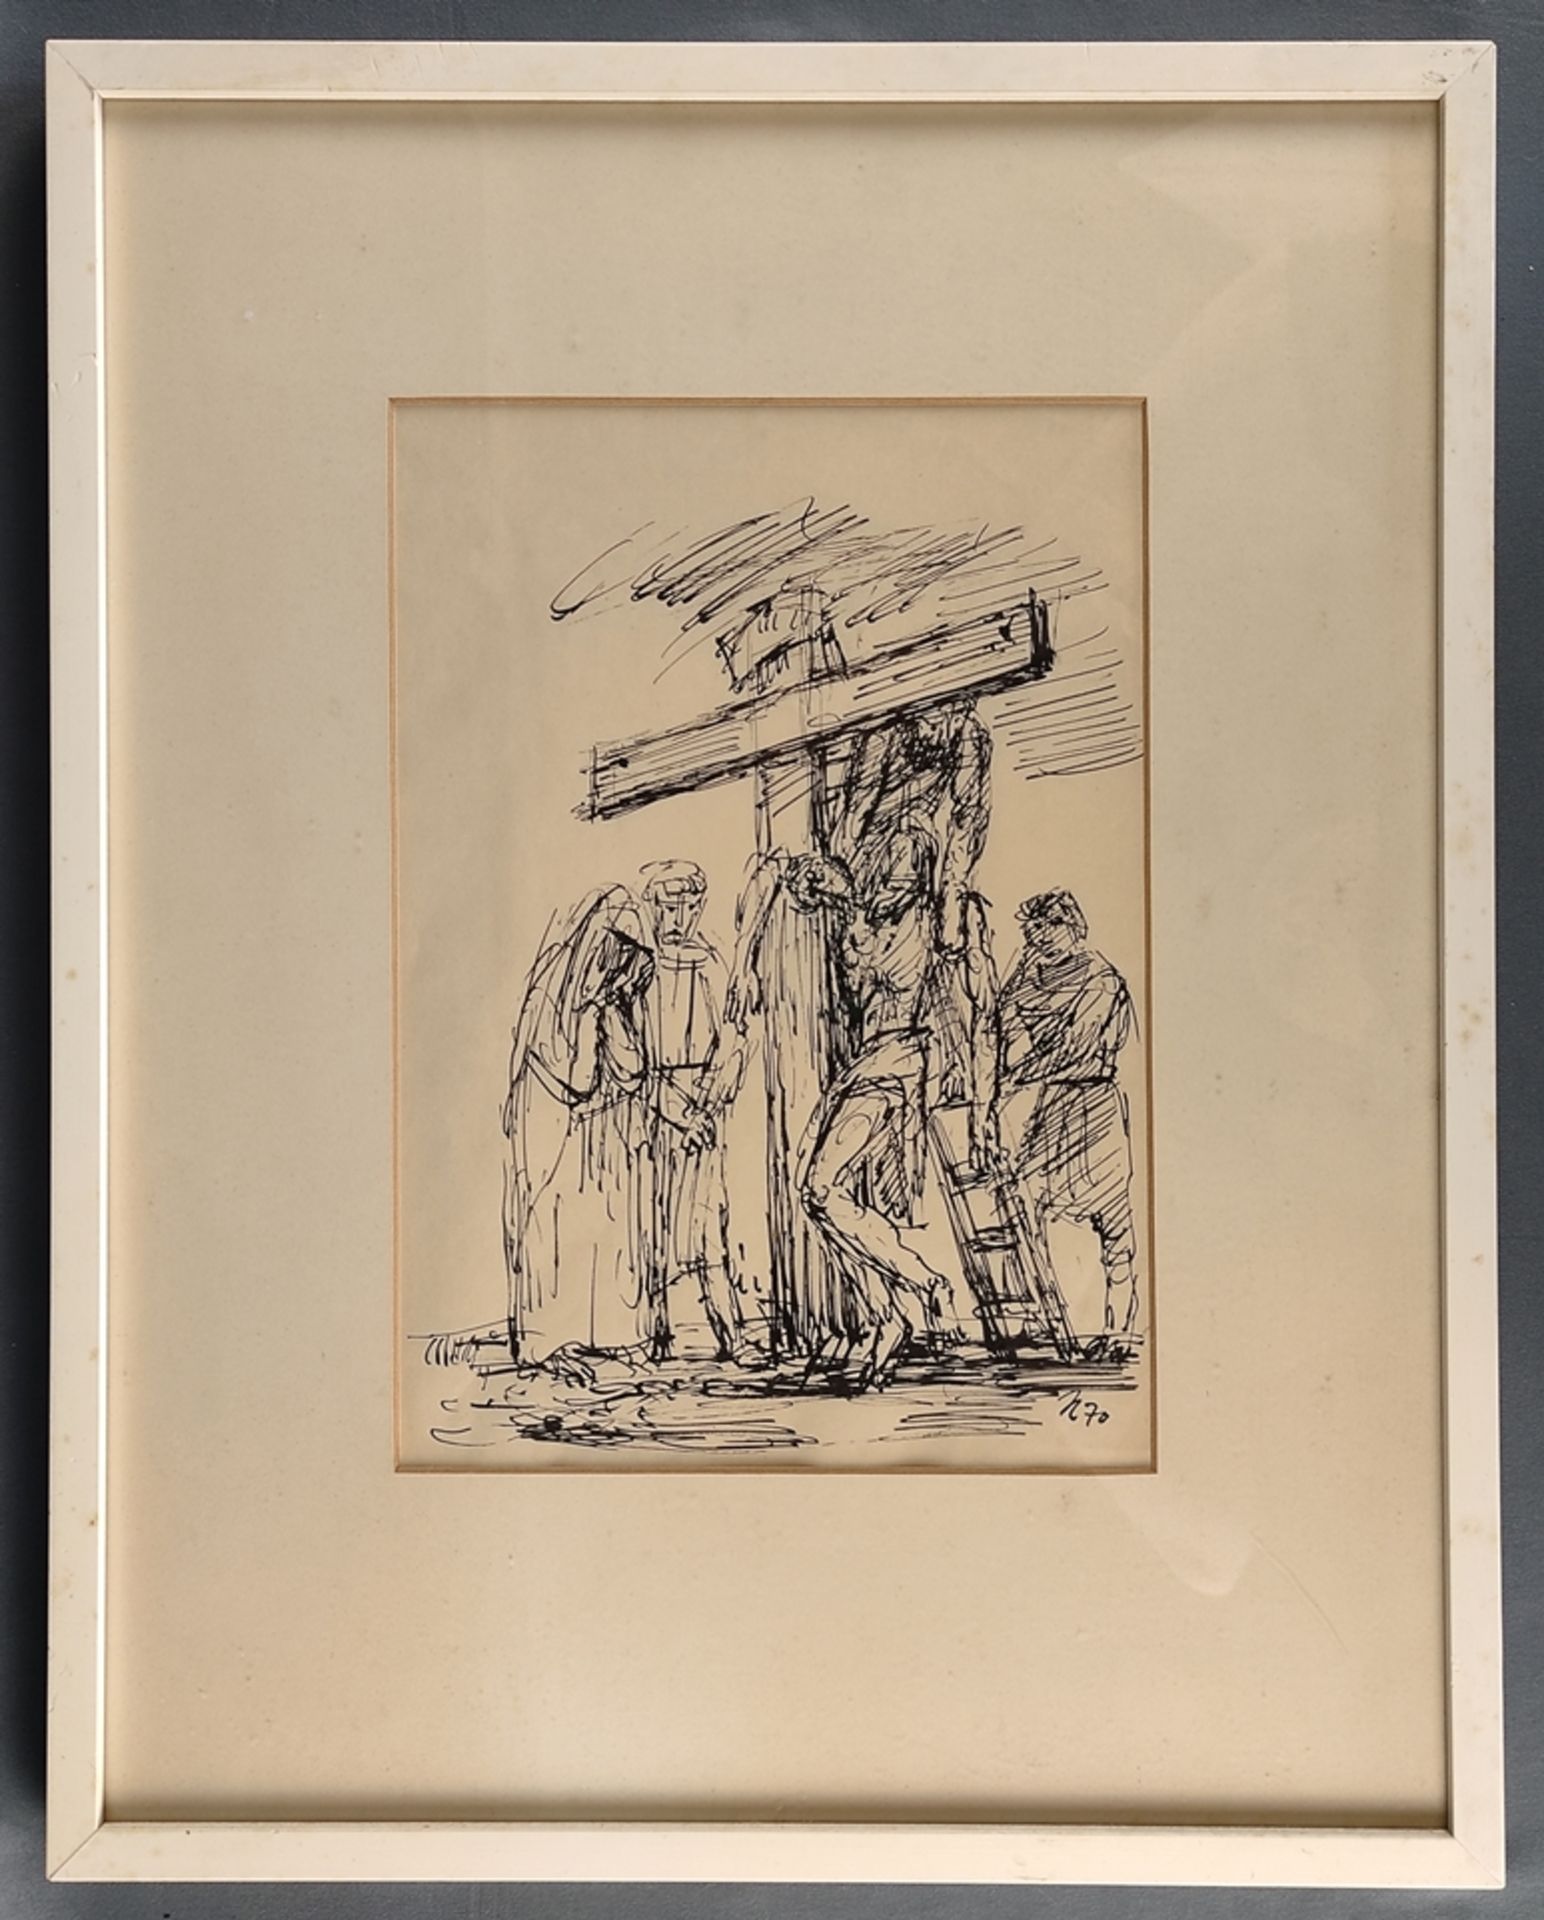 Herburger, Julius (1900-1973 Ravensburg) "Descent from the cross", ink on paper, monogrammed and da - Image 2 of 3